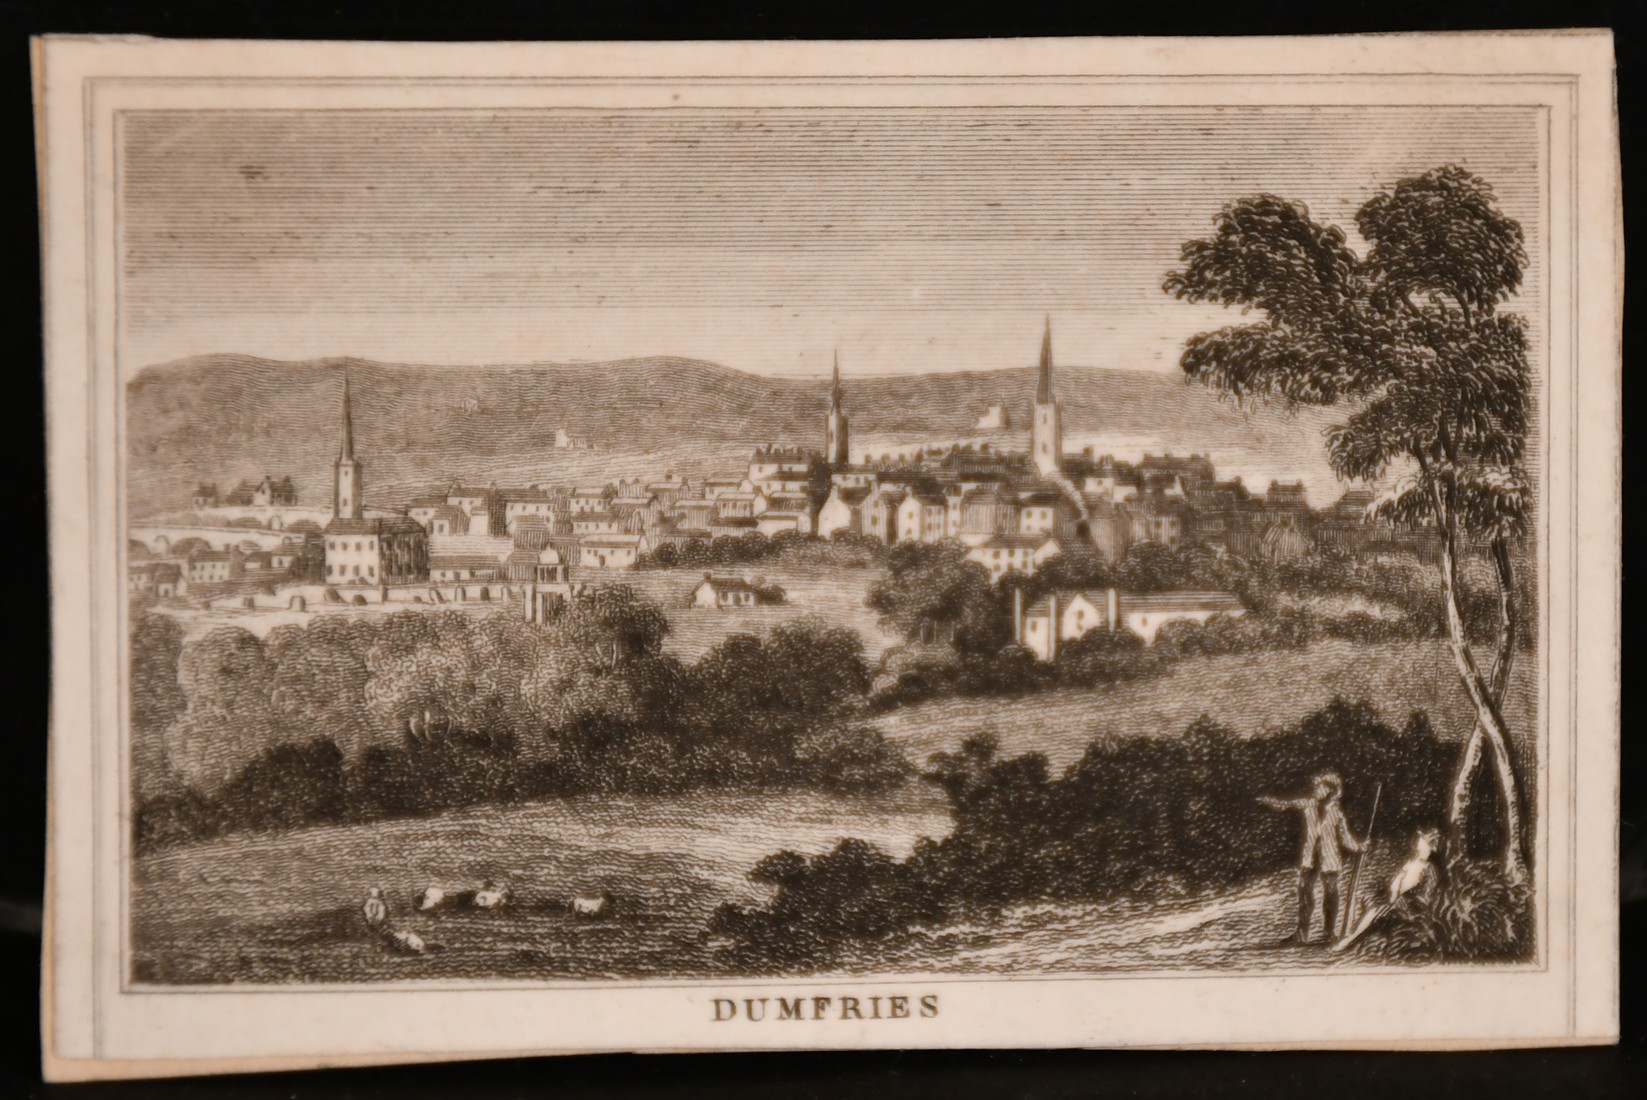 A collection of 19th century engravings including 'Edinburgh, From The Calton Hill' and 'Friars - Image 3 of 4